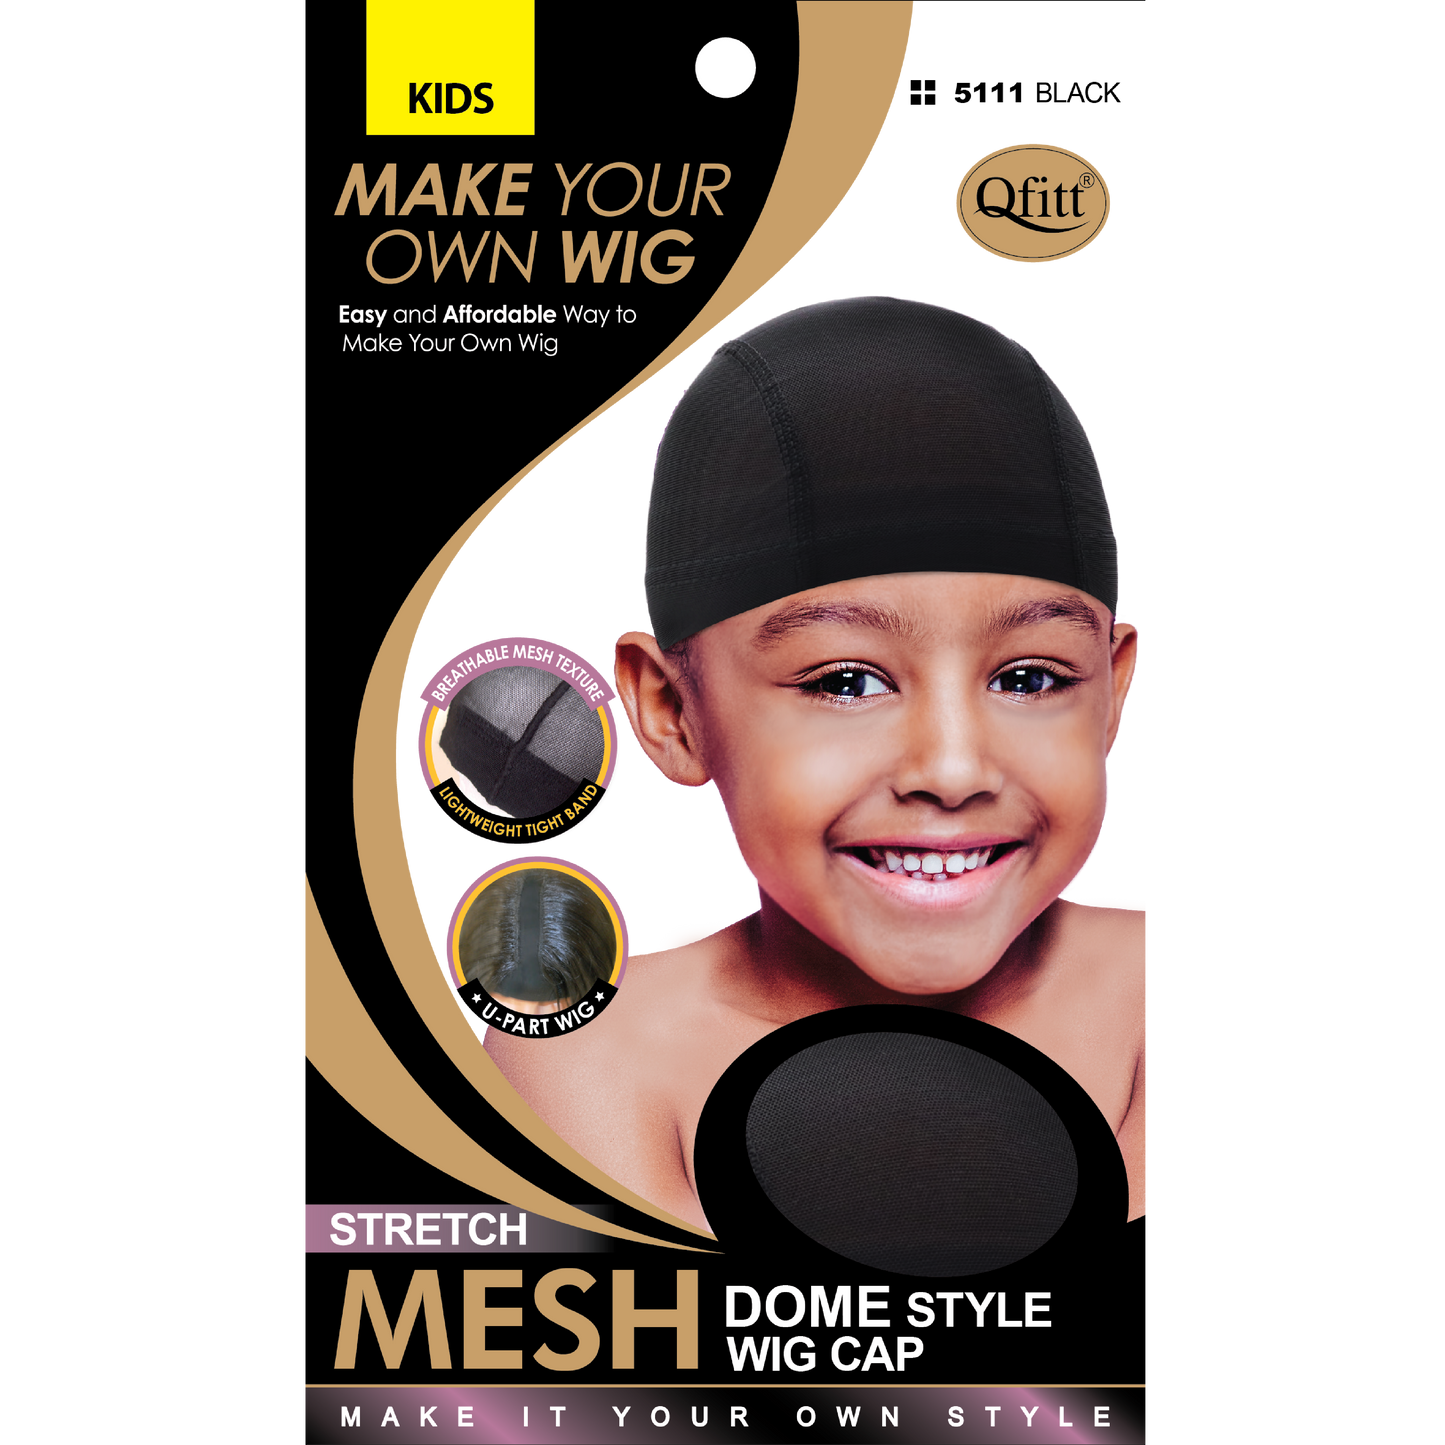 STRETCH MESH DOME STYLE WIG CAP